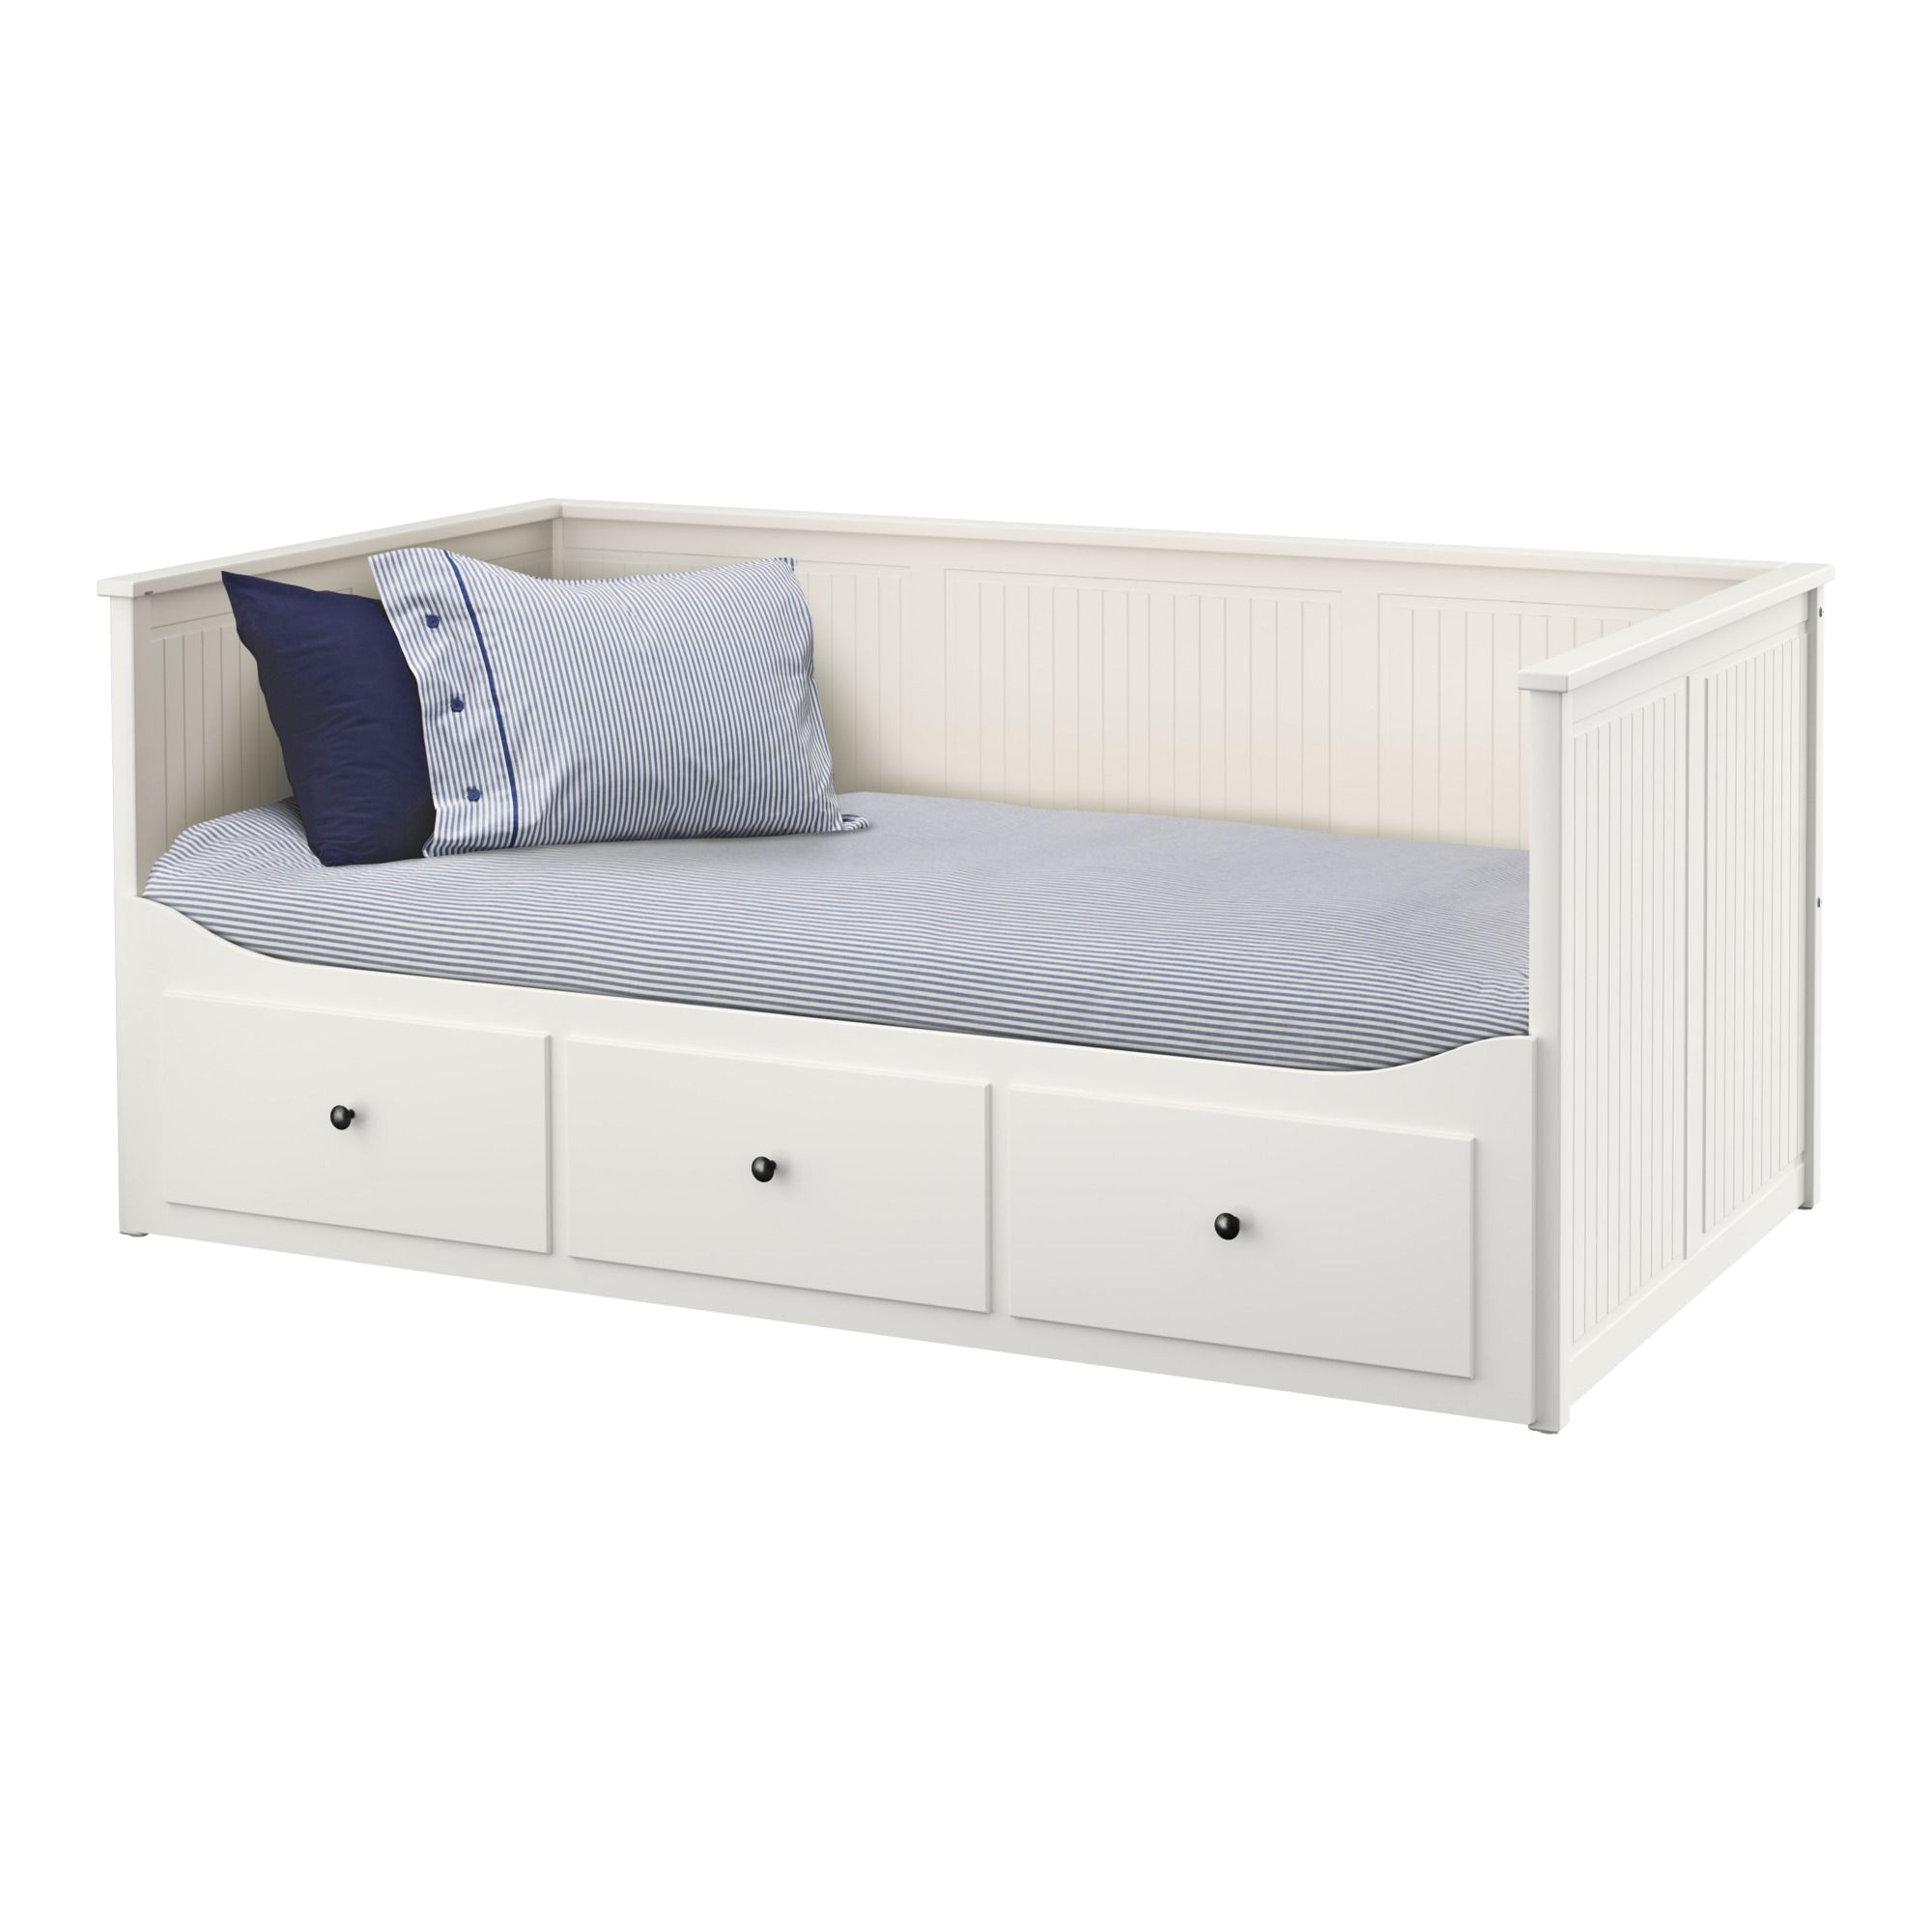 ikea hemnes daybed frame with 3 drawers four functions sofa single bed double bed and storage solution